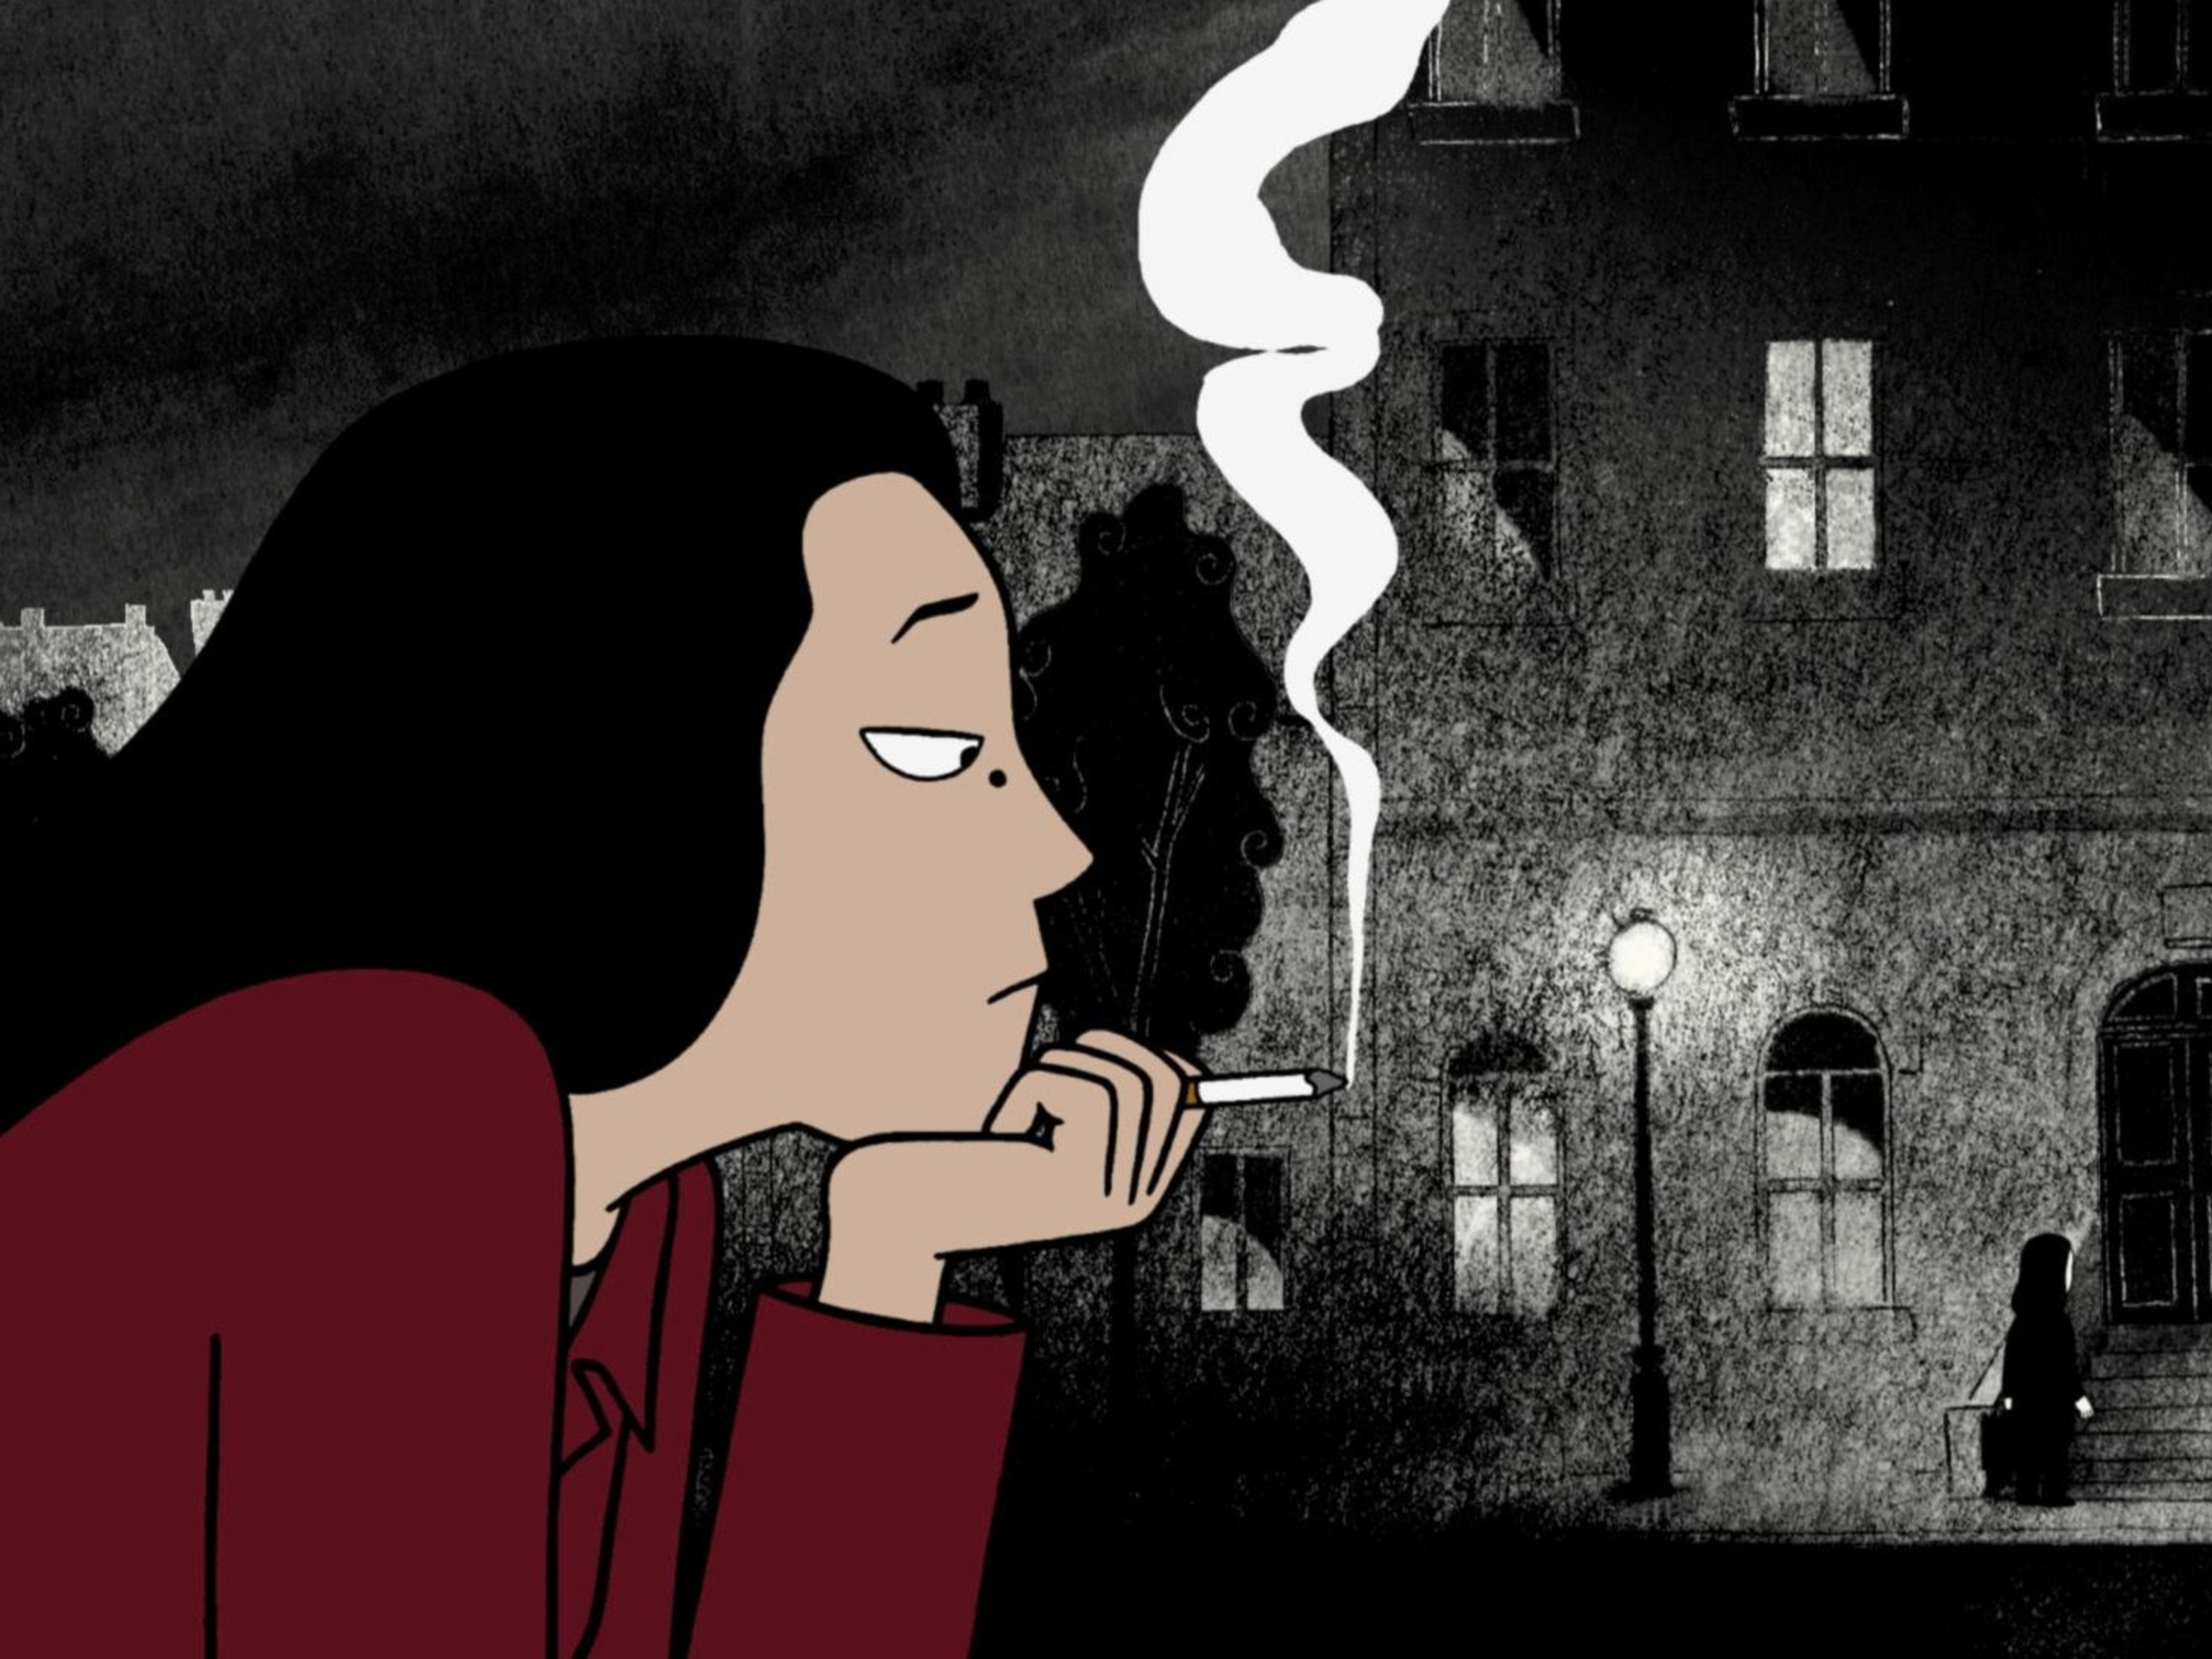 Best Animated Movies of All Time - Persepolis